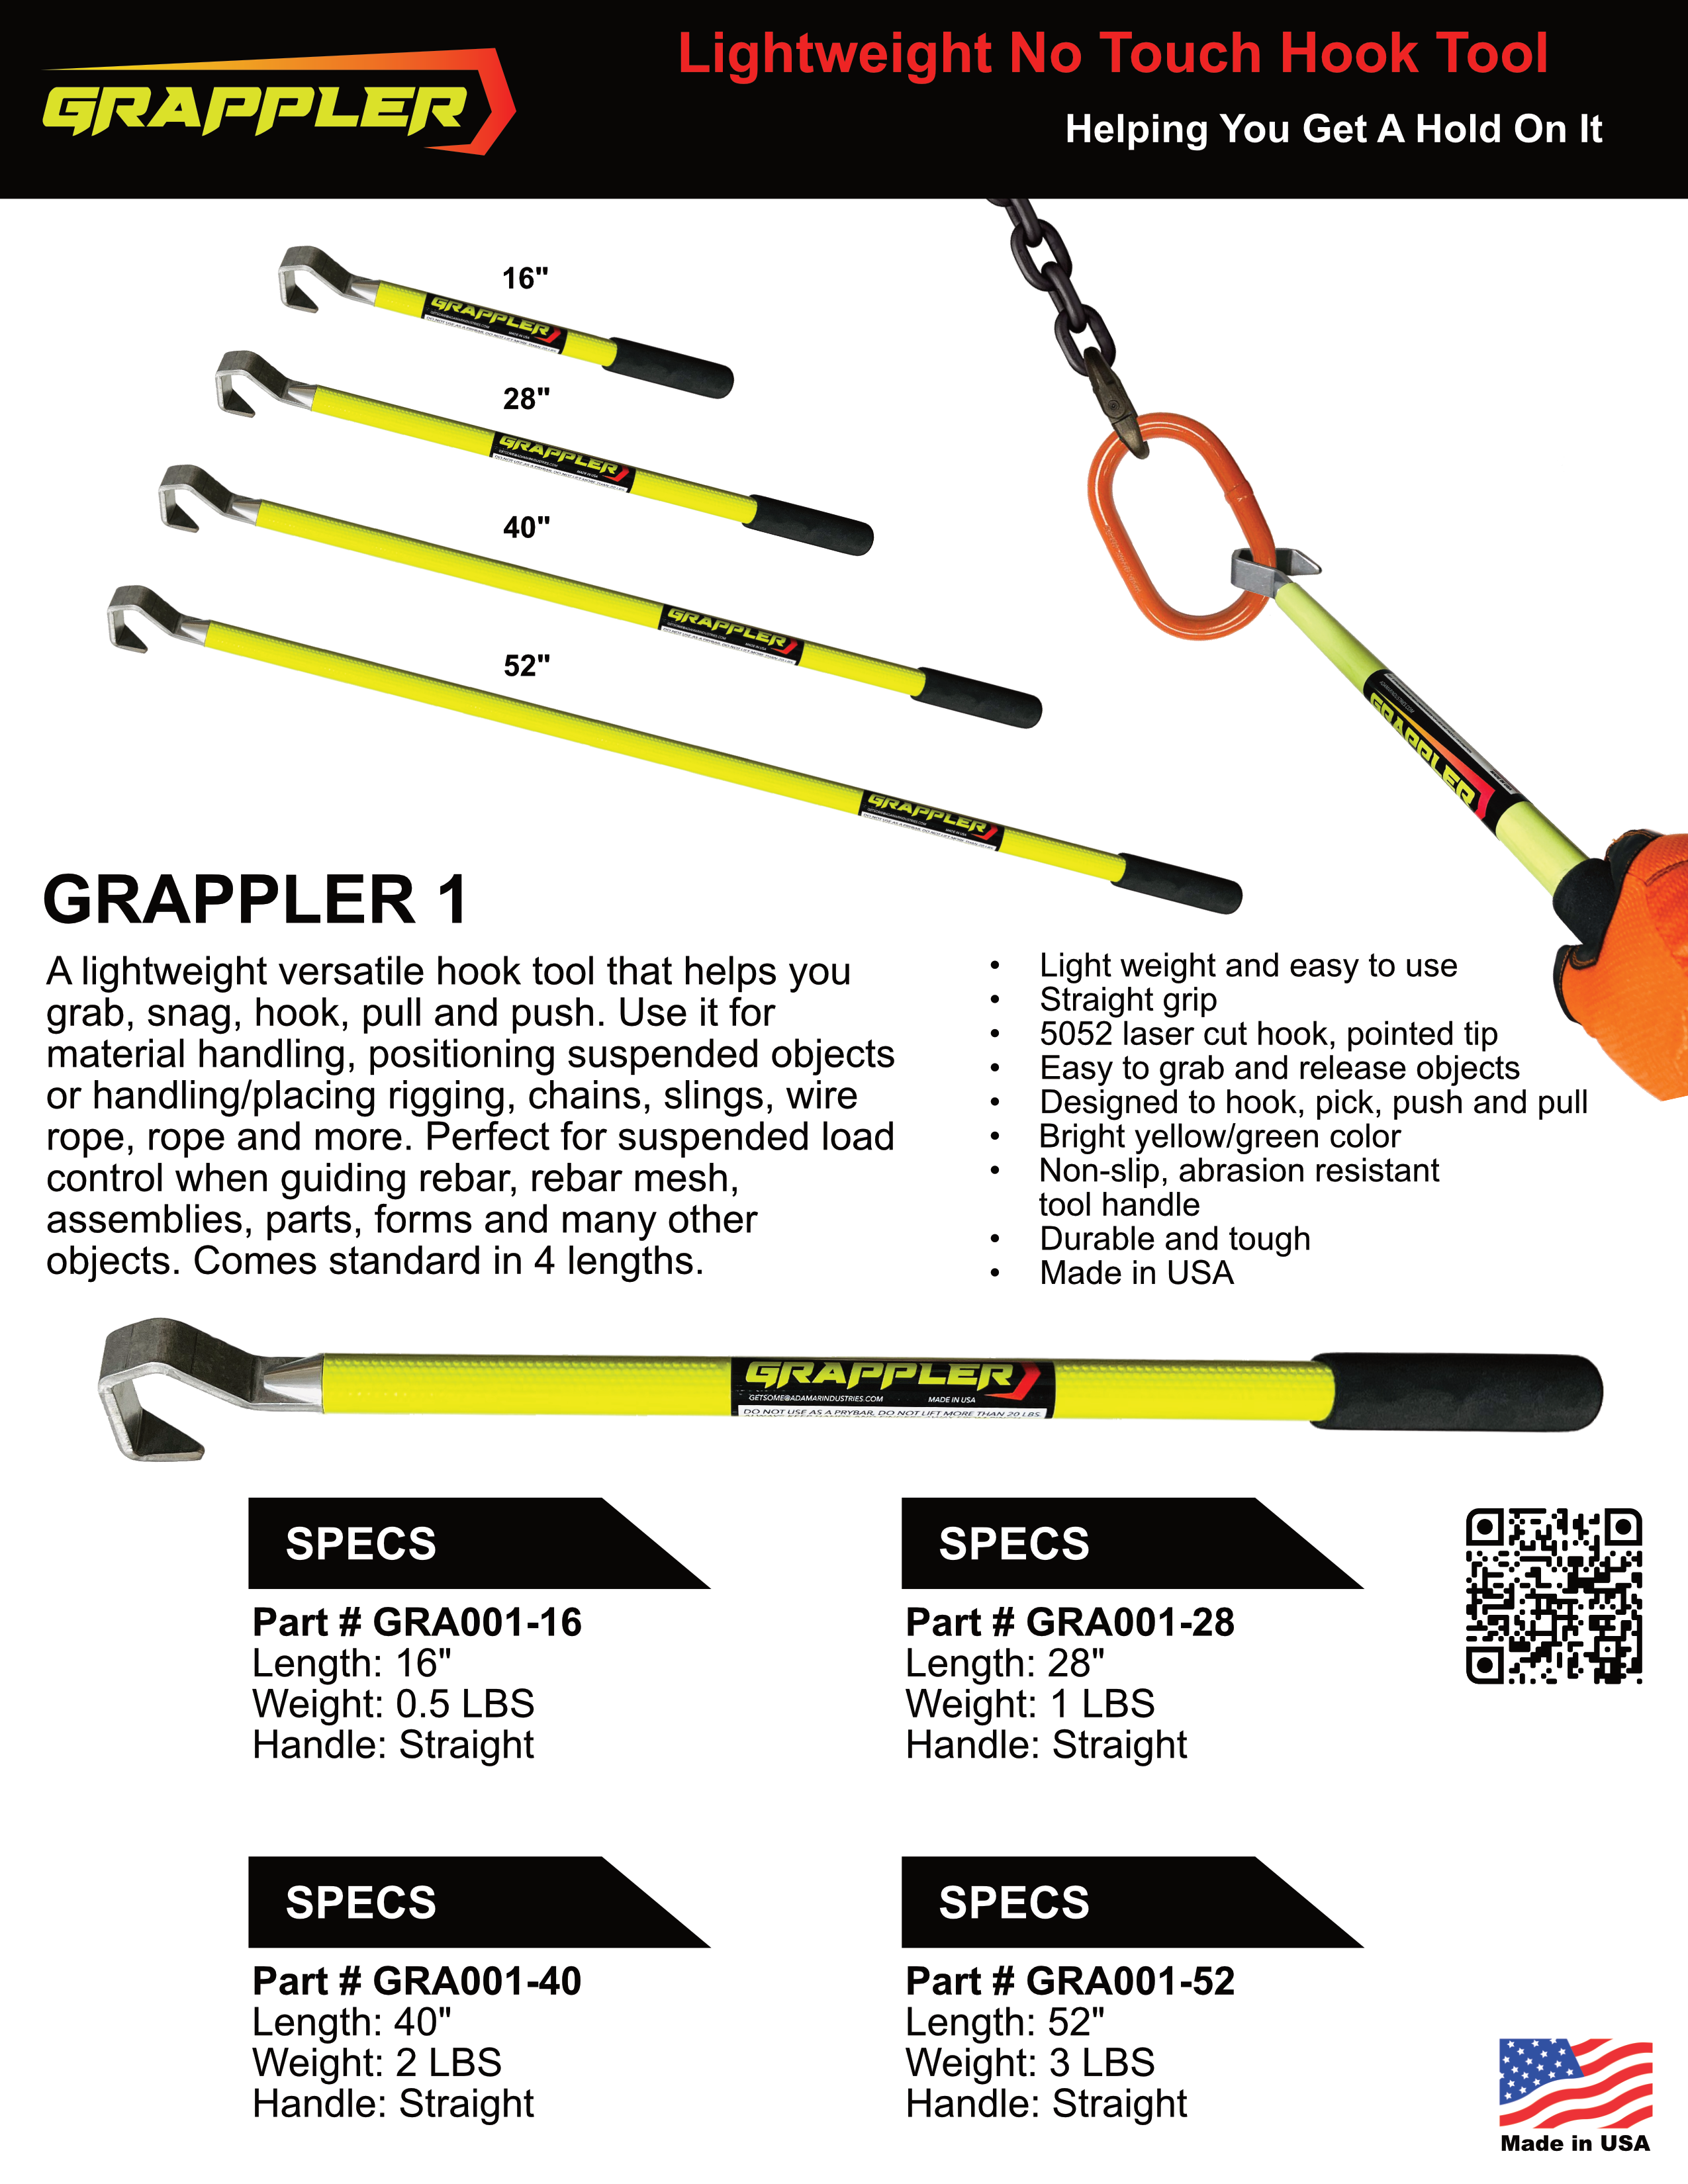 Grappler 1 - Hook Tool. Lightweight Hand Safety Tool Used To Hook, Pick,  Push, Pull, Guide and Control. Material handling tools. Use It On Chain,  Wire Rope, Suspended Loads, Rigging, Pipes, Chain